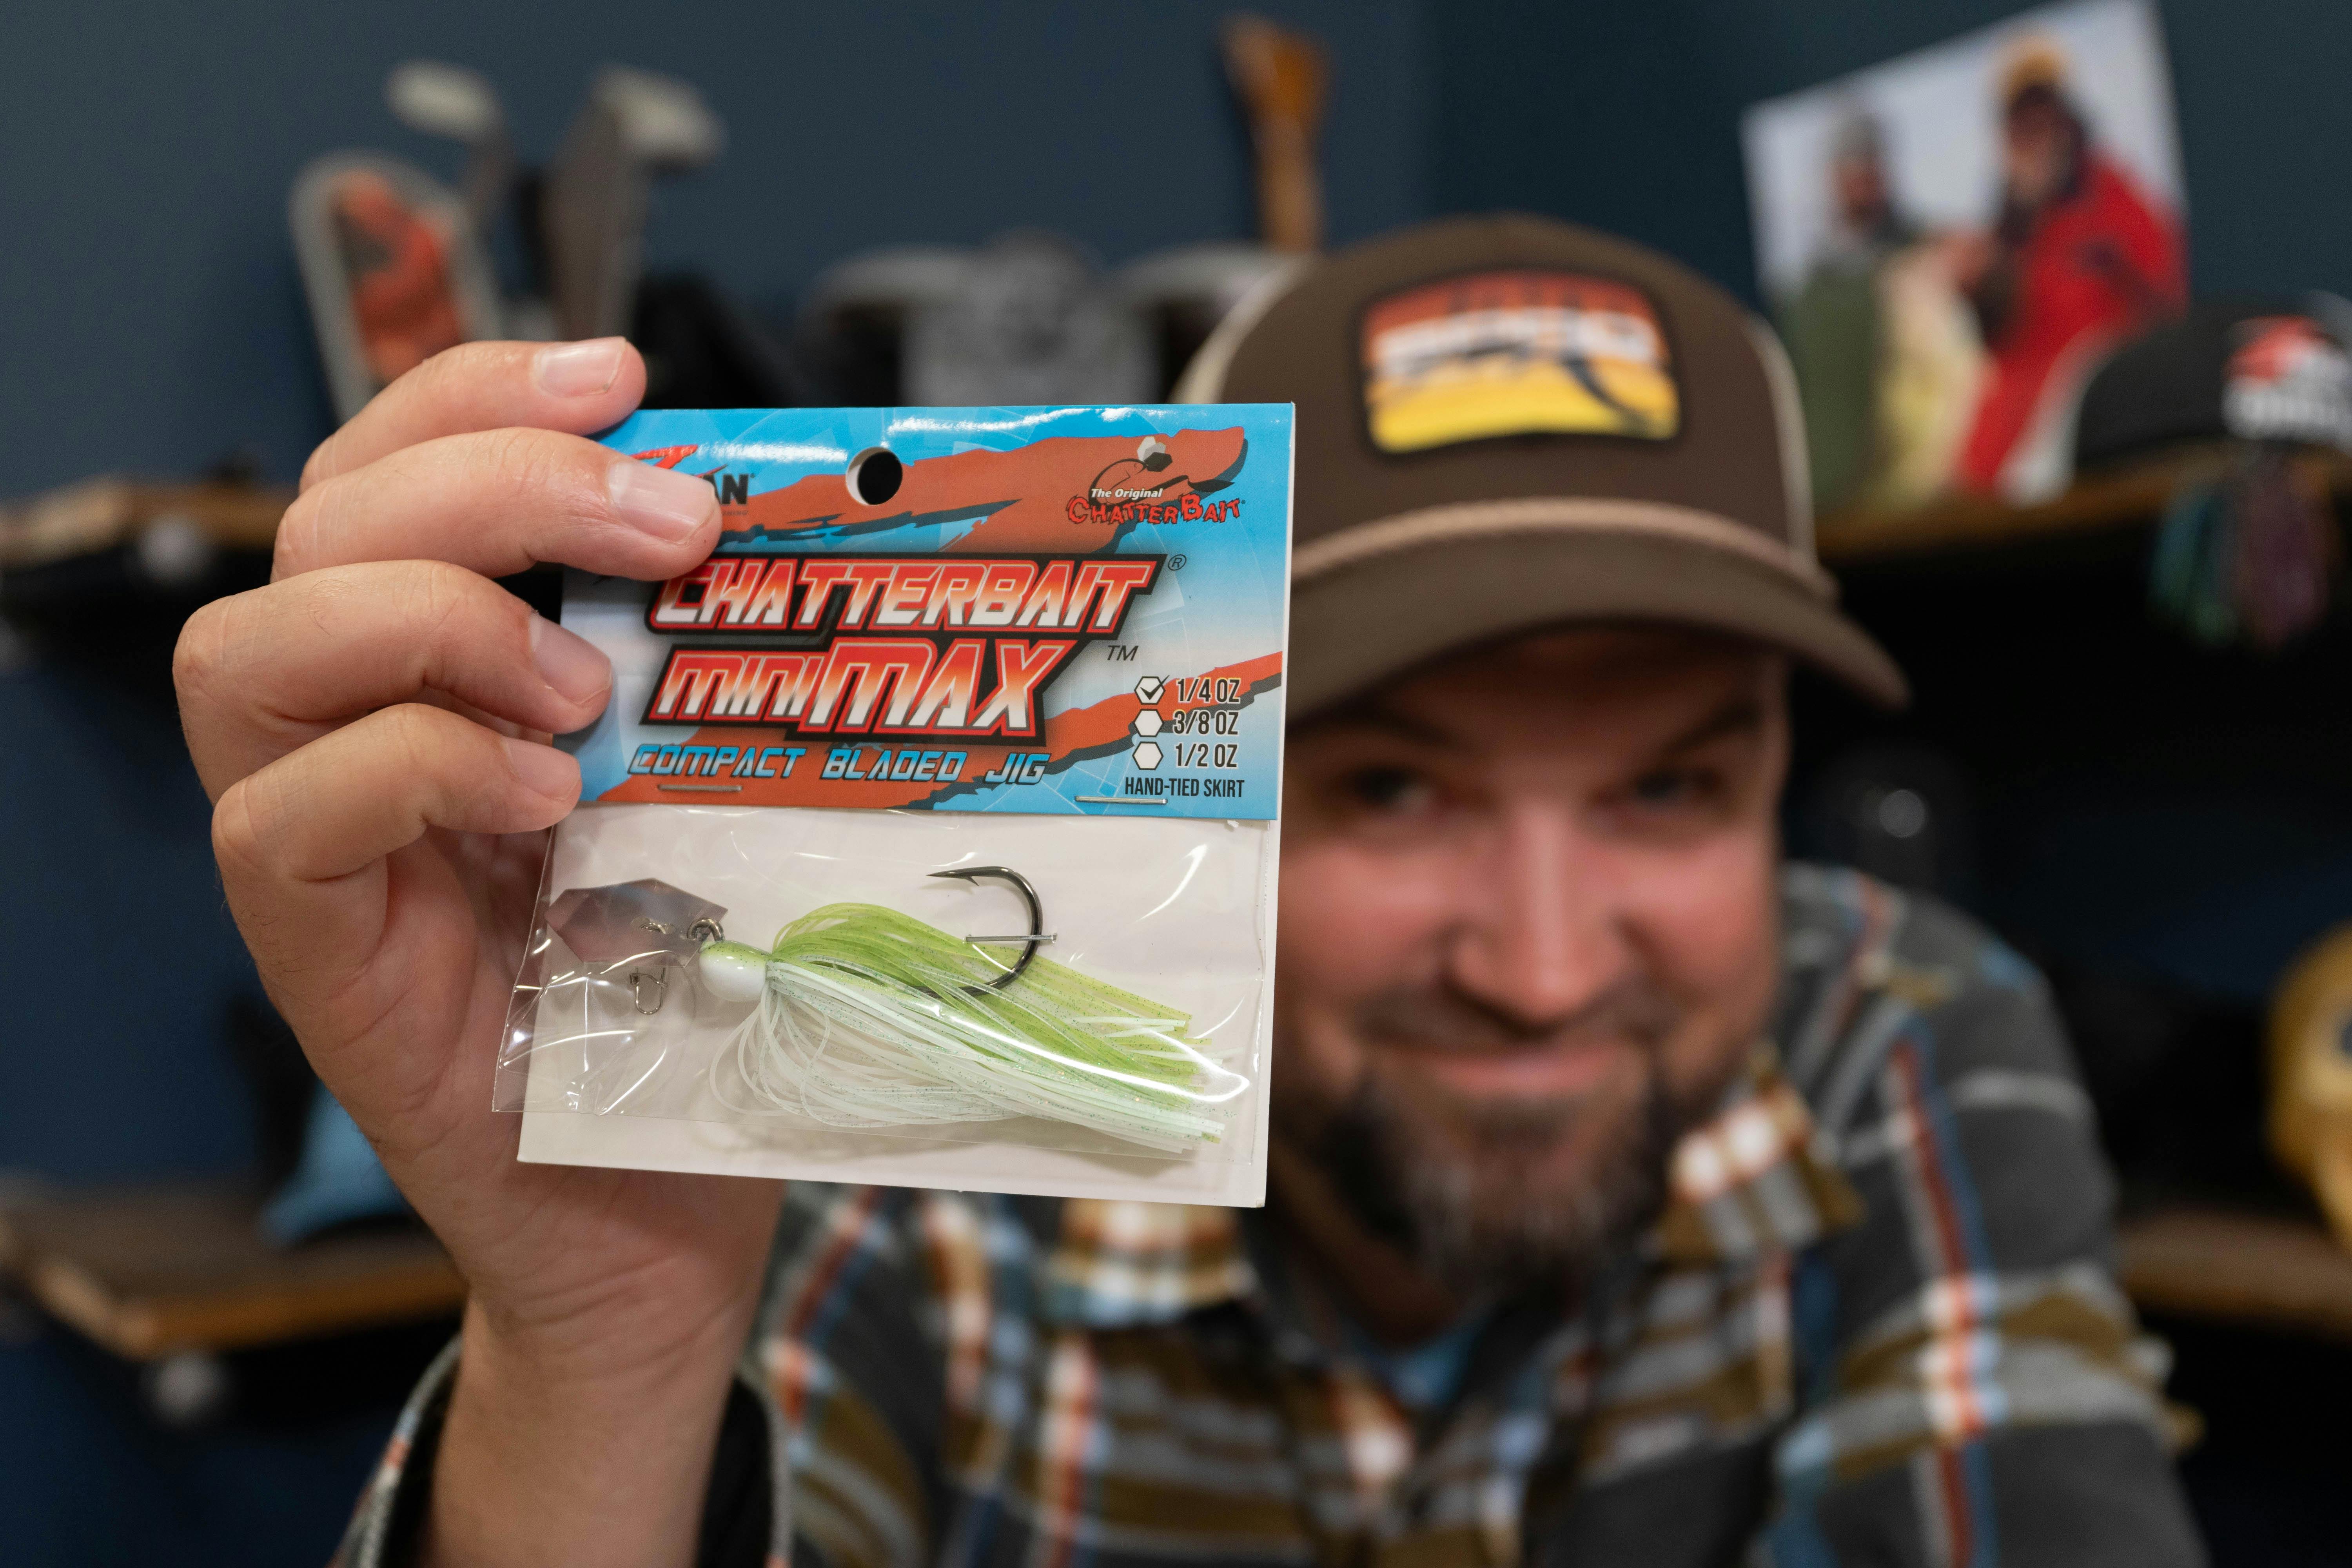 Which Chatterbait Is Best?